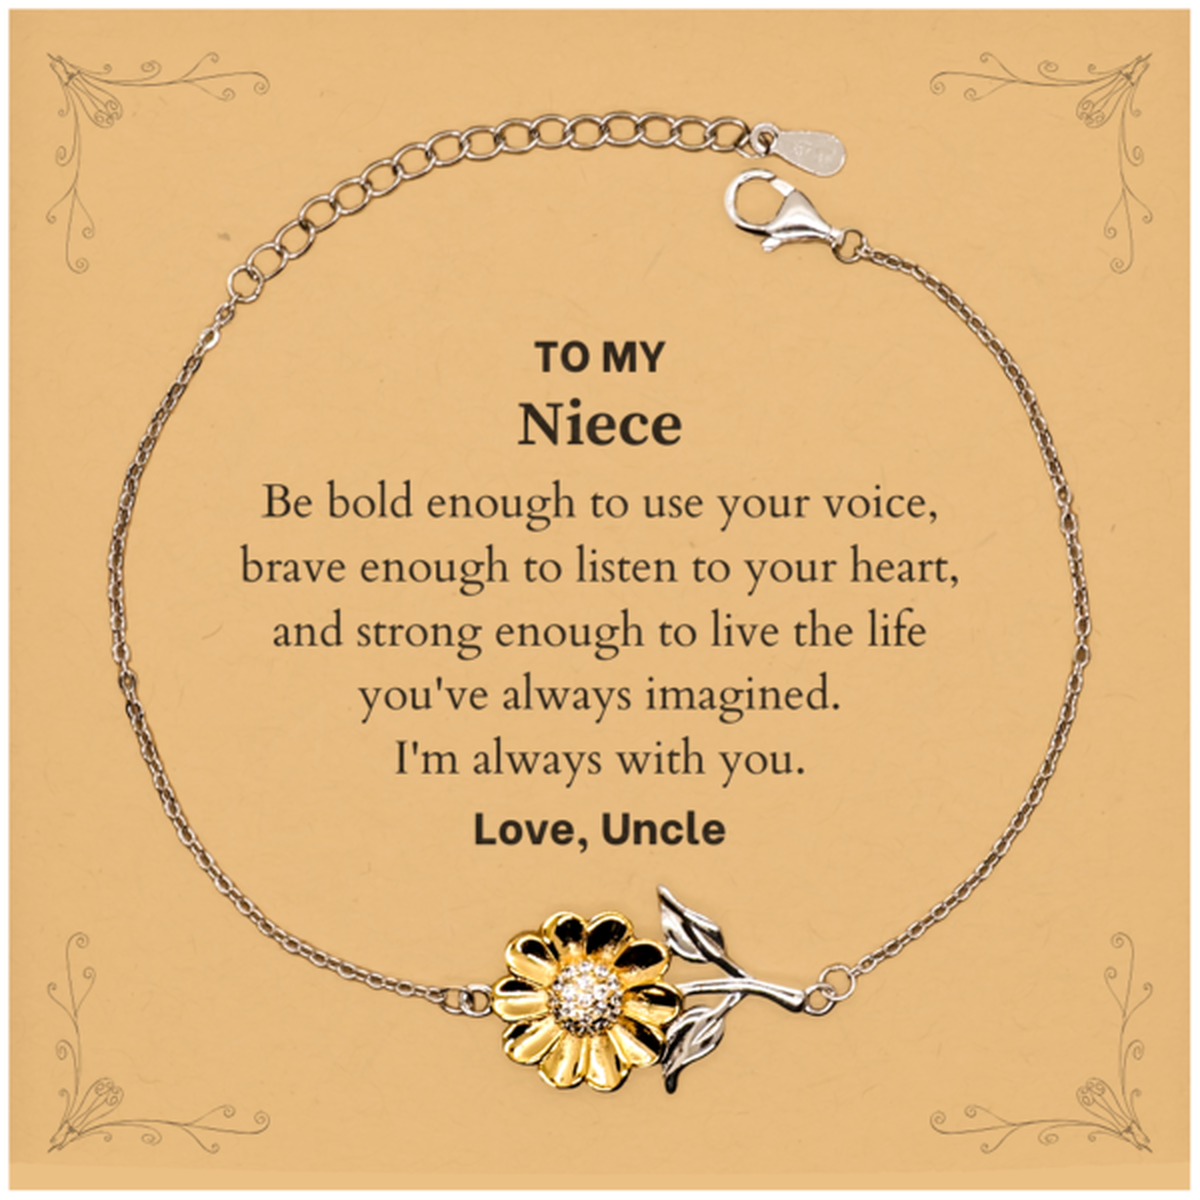 Keepsake Niece Sunflower Bracelet Gift Idea Graduation Christmas Birthday Niece from Uncle, Niece Be bold enough to use your voice, brave enough to listen to your heart. Love, Uncle